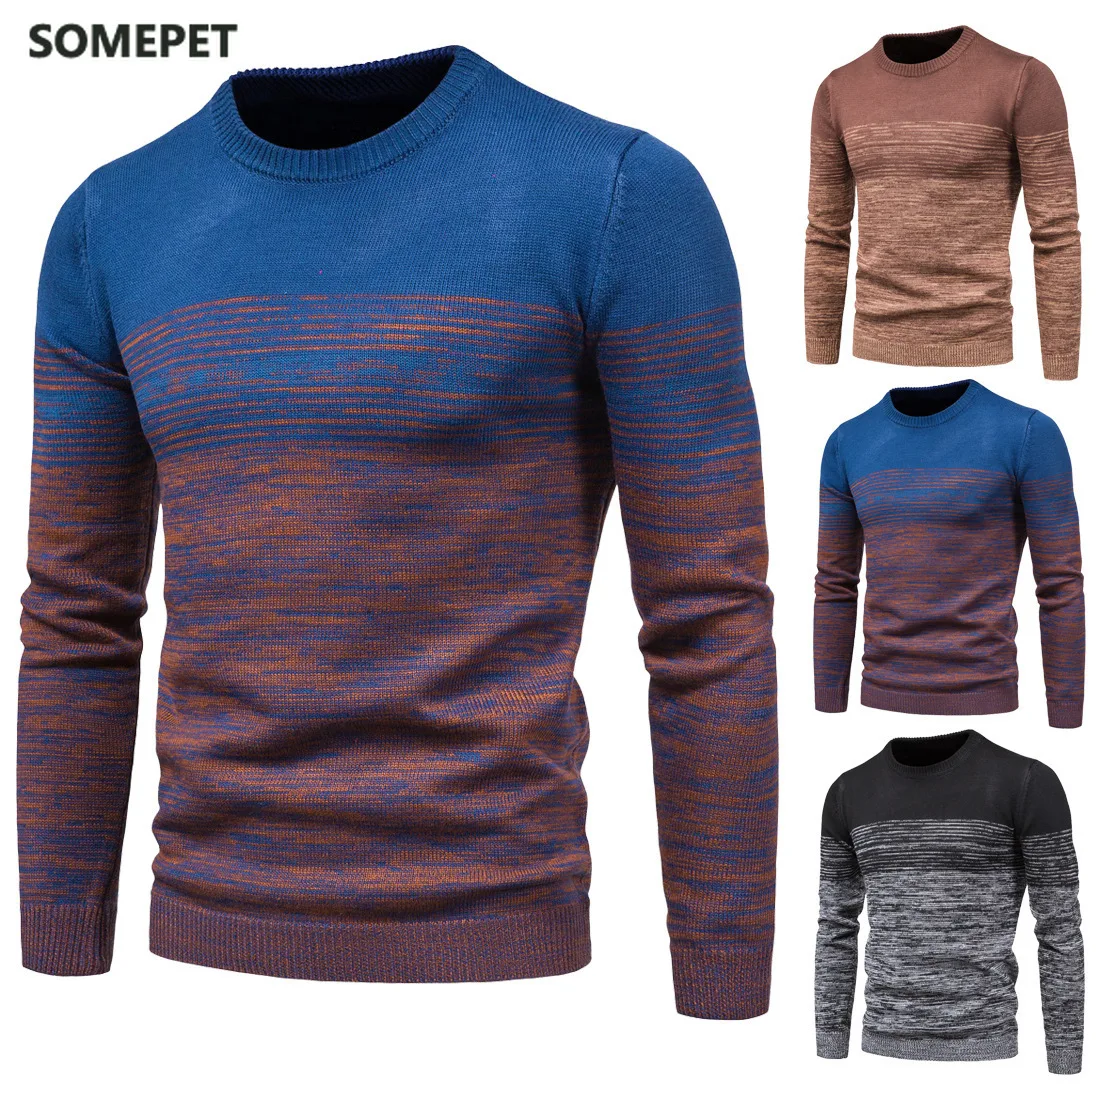 

New Spring Autumn Men's Knitwear Hedging Round Neck Variegated Contrast Fashion Base Sweater Male Tops 2021